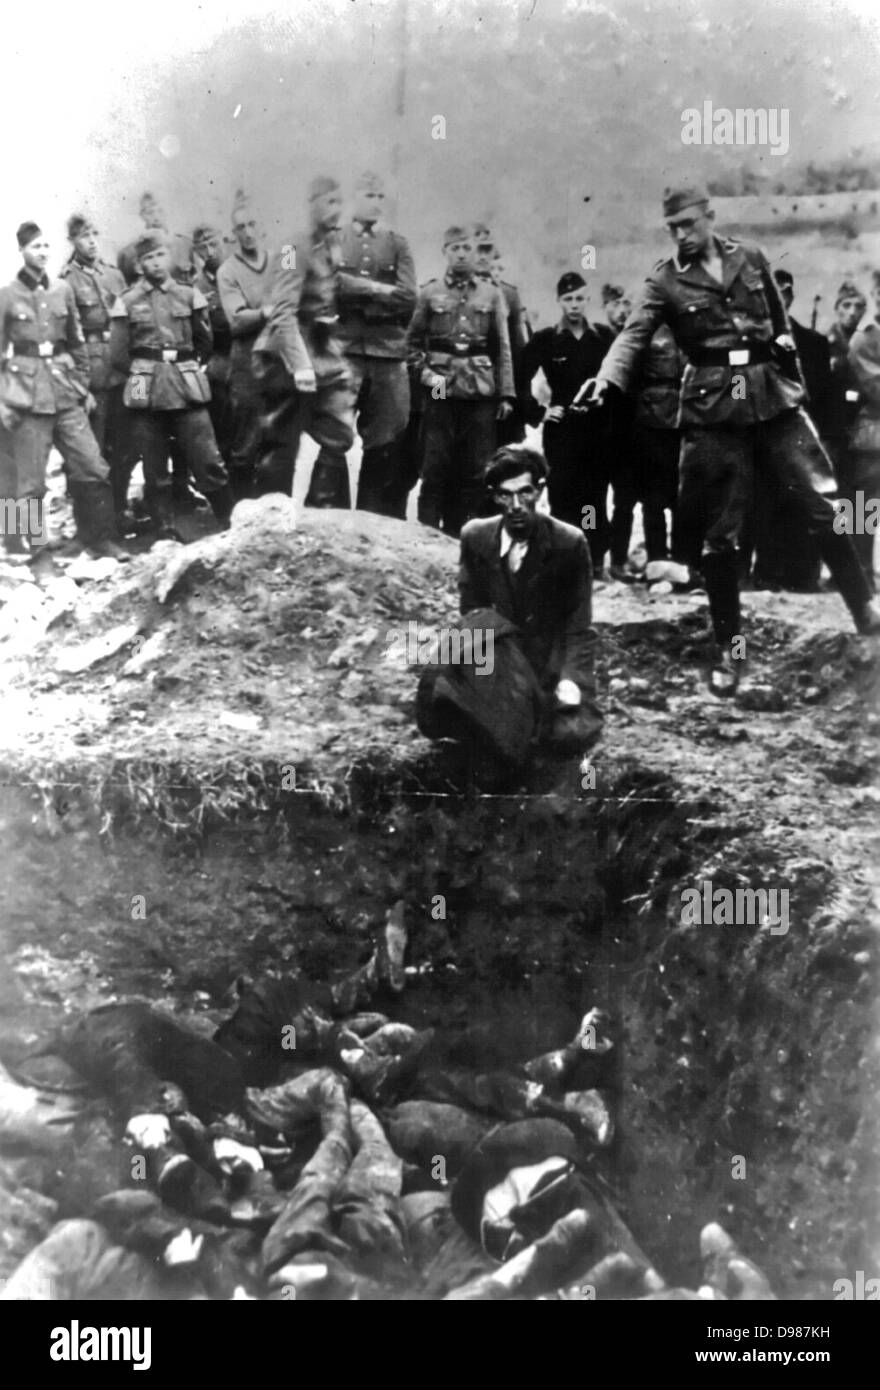 The Final Solution to the Jewish Question: An Einsatzgruppe D soldier about to shoot a Jew kneeling at a partially filled mass grave in Vinnitsa, Ukrainian SSR, Soviet Union, in 1942. The Einsatzgruppen were SS paramilitary task forces whose main purpose was the extermination of Jews. Stock Photo